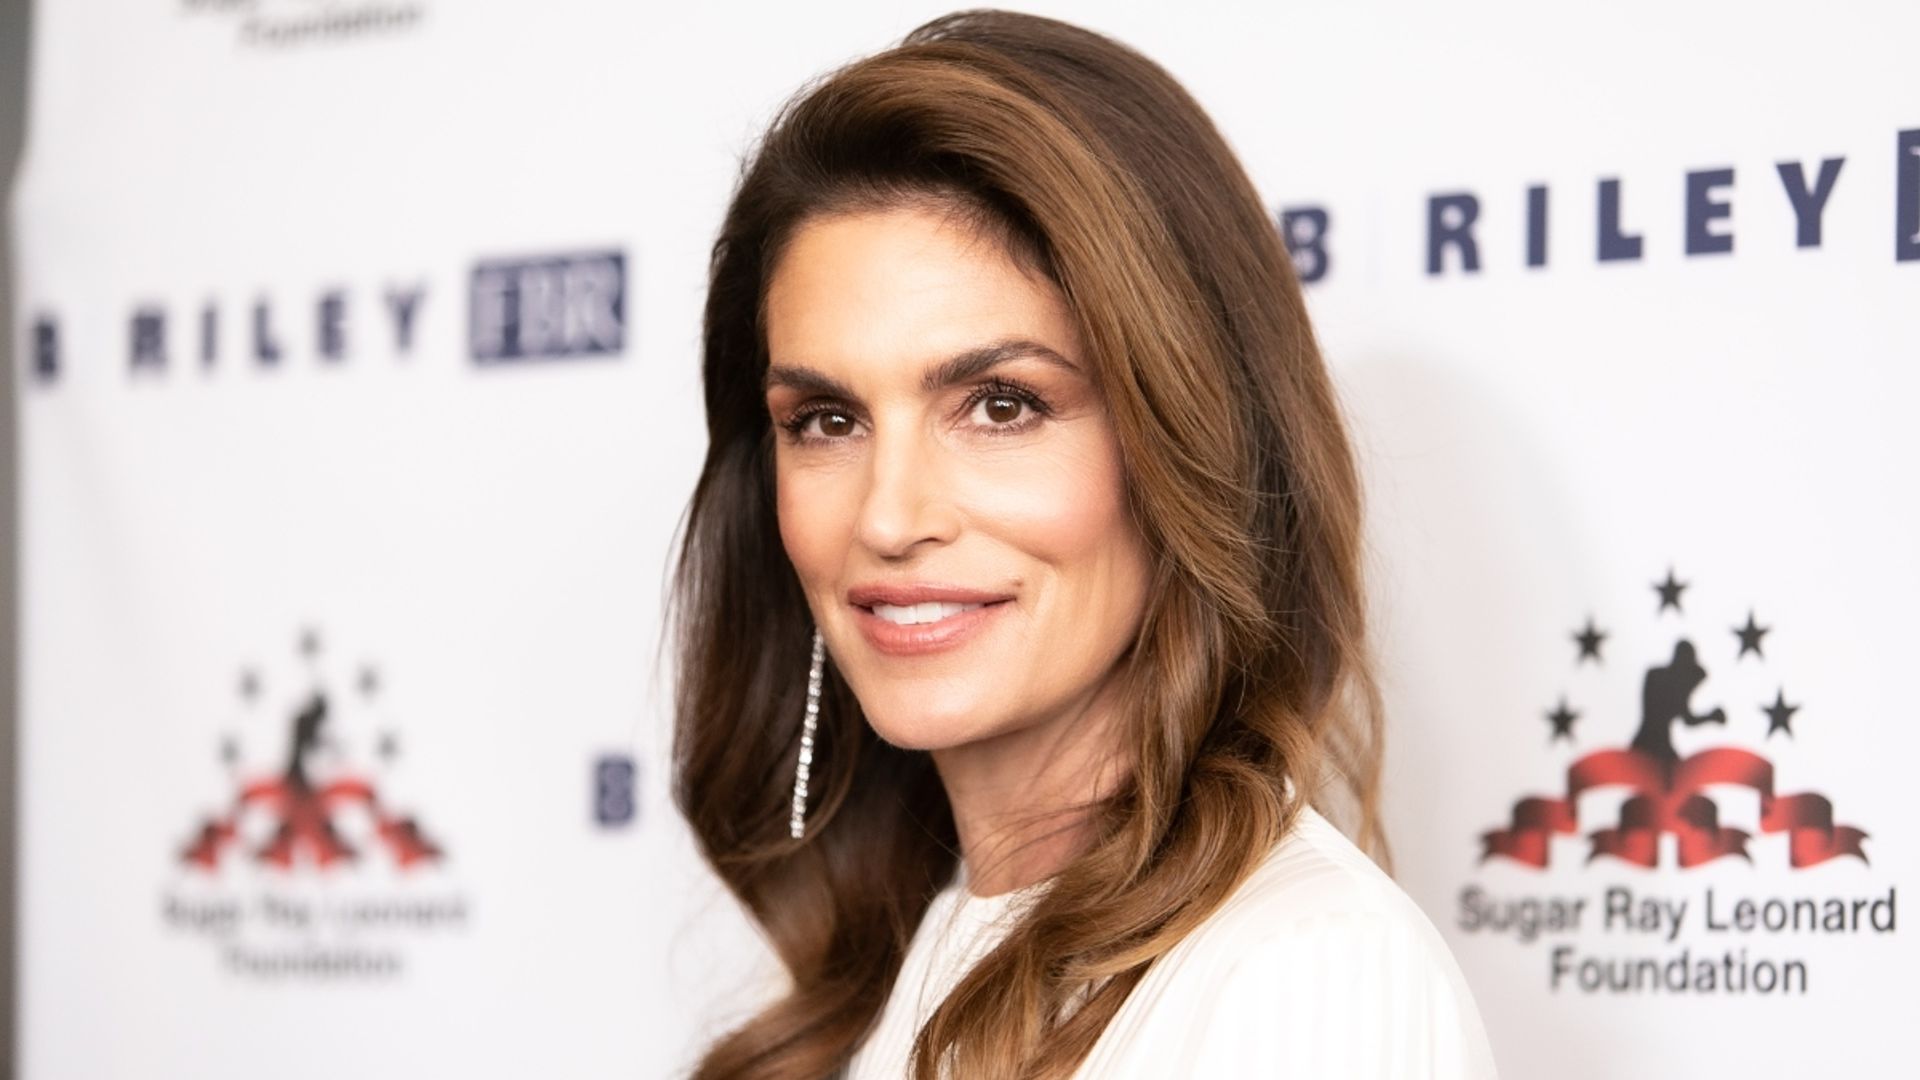 Cindy Crawford displays supermodel figure in home video and fans all notice one thing